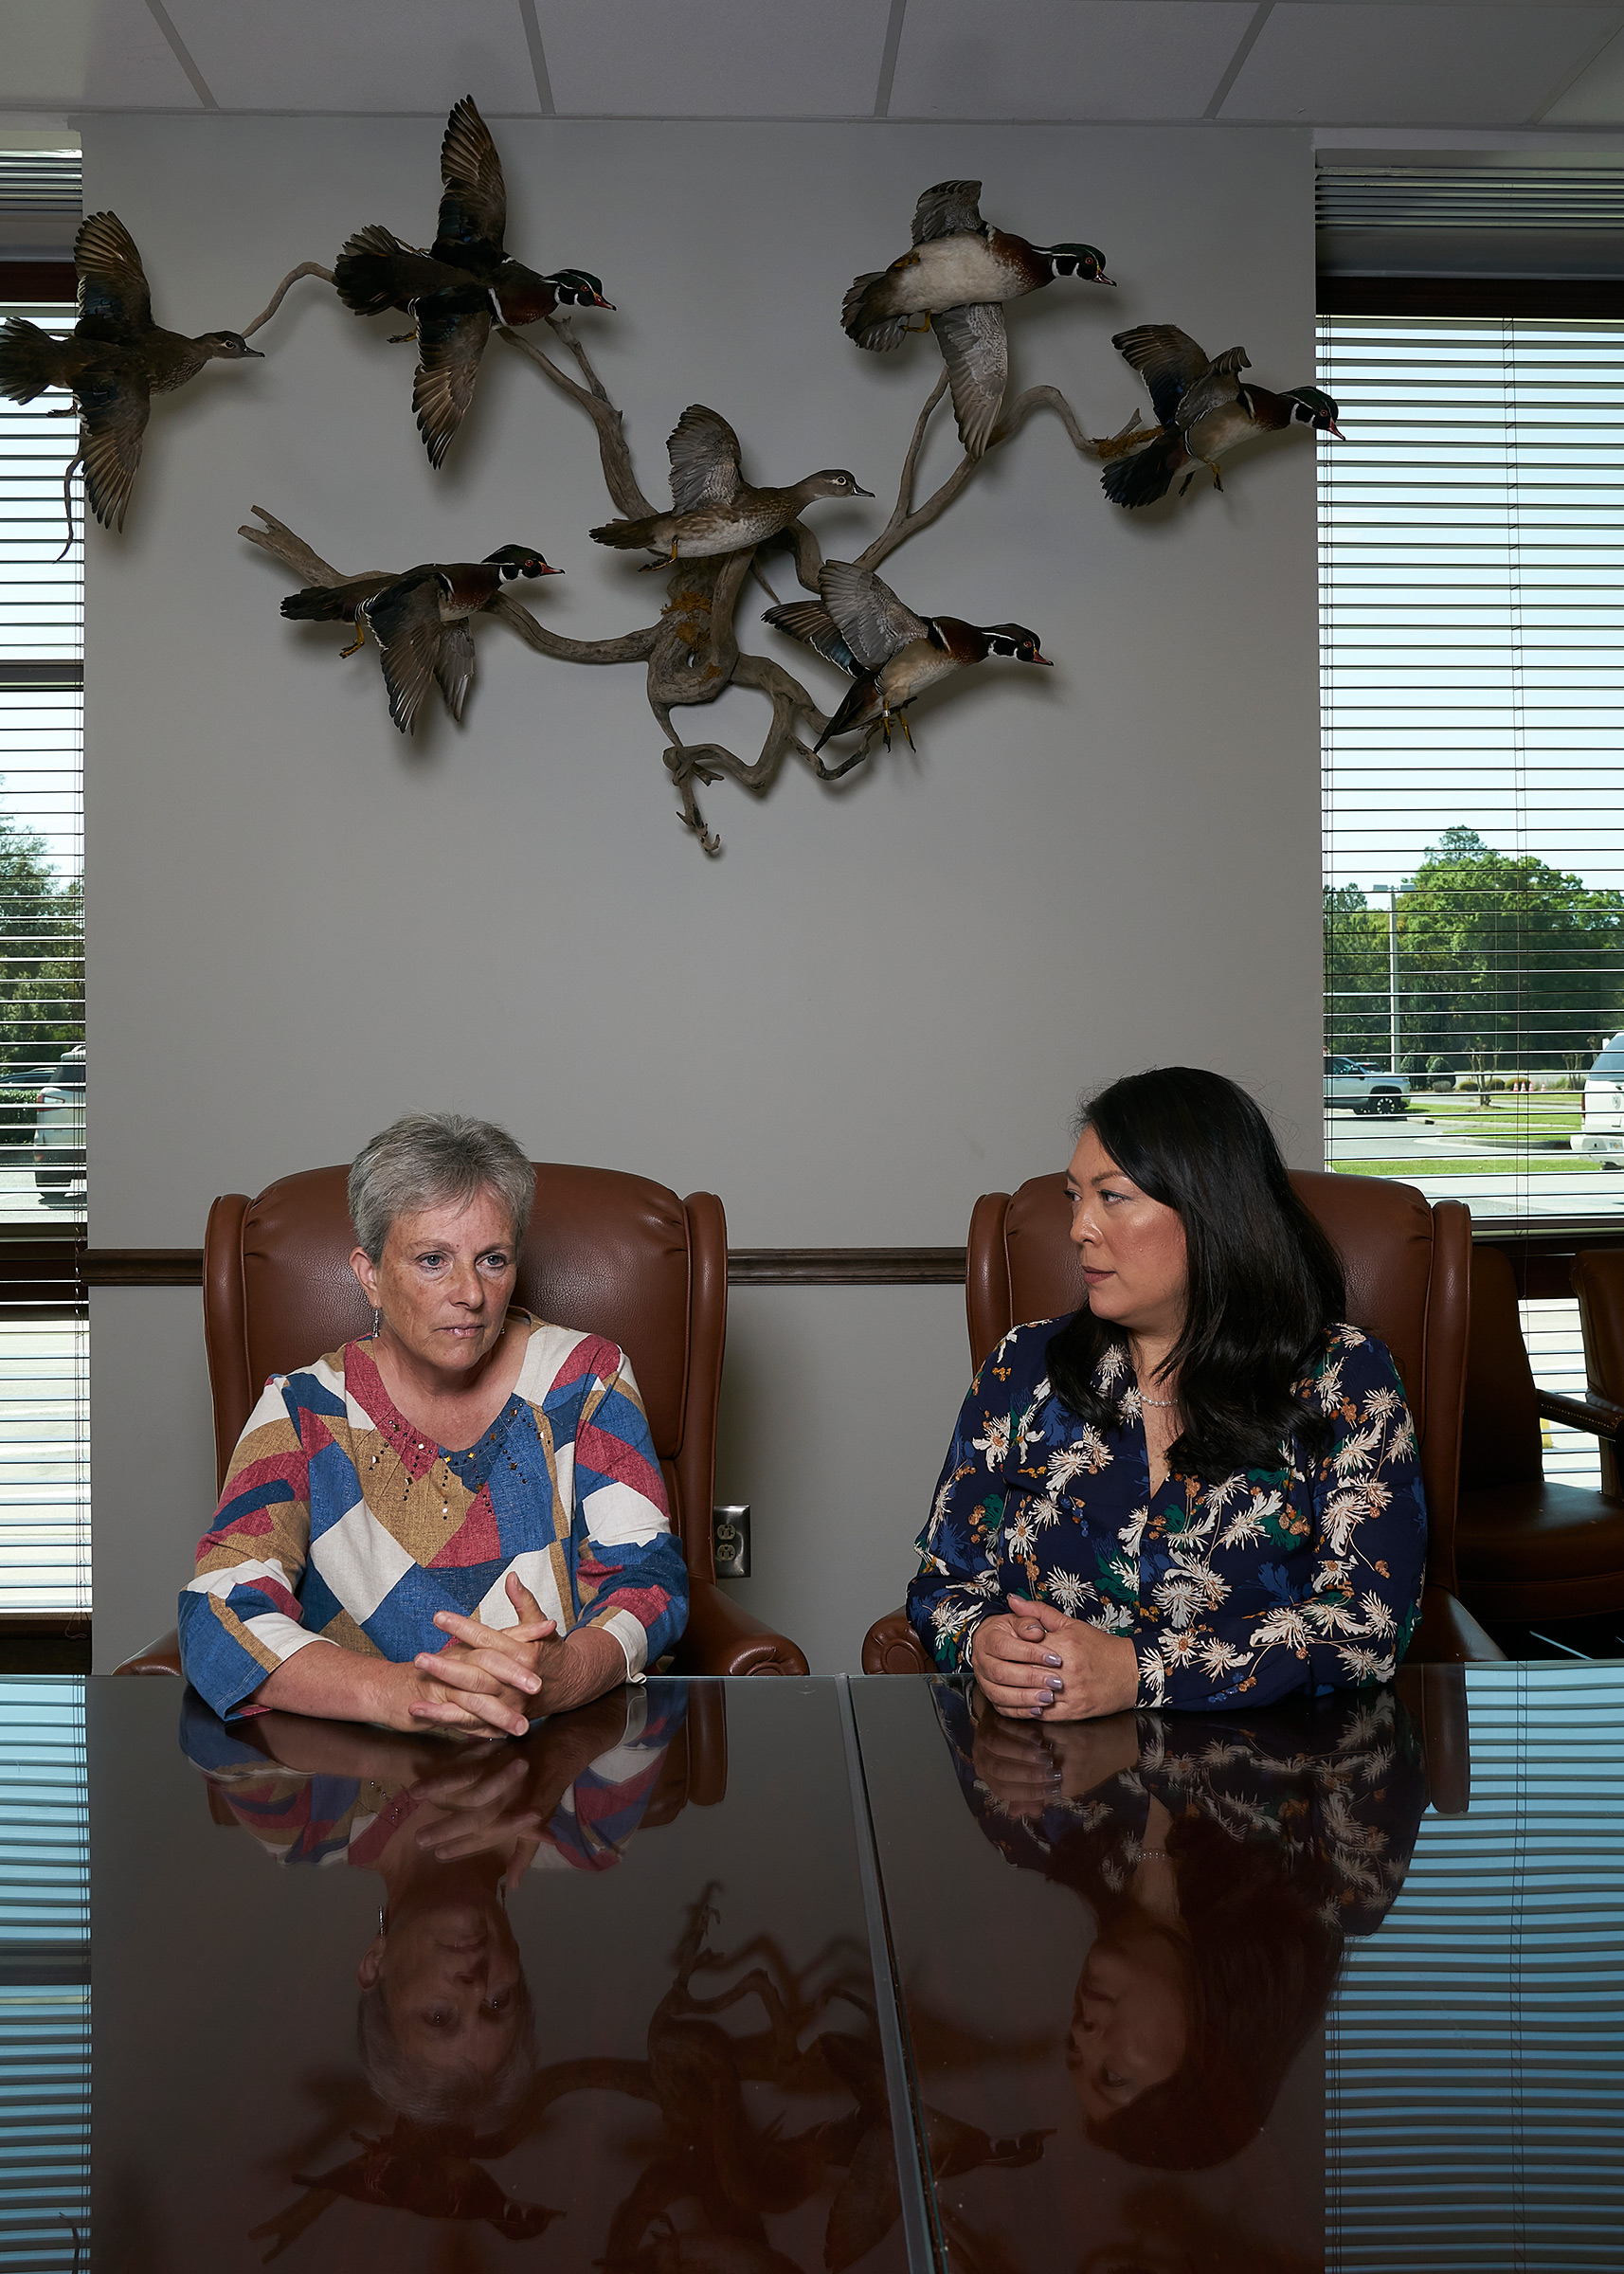 Miller County Hospital CEO Robin Rau, left, and Clinch Memorial Hospital CEO Angela Ammons in Homerville, Ga., on March 19, 2020. (Stacy Kranitz for TIME)